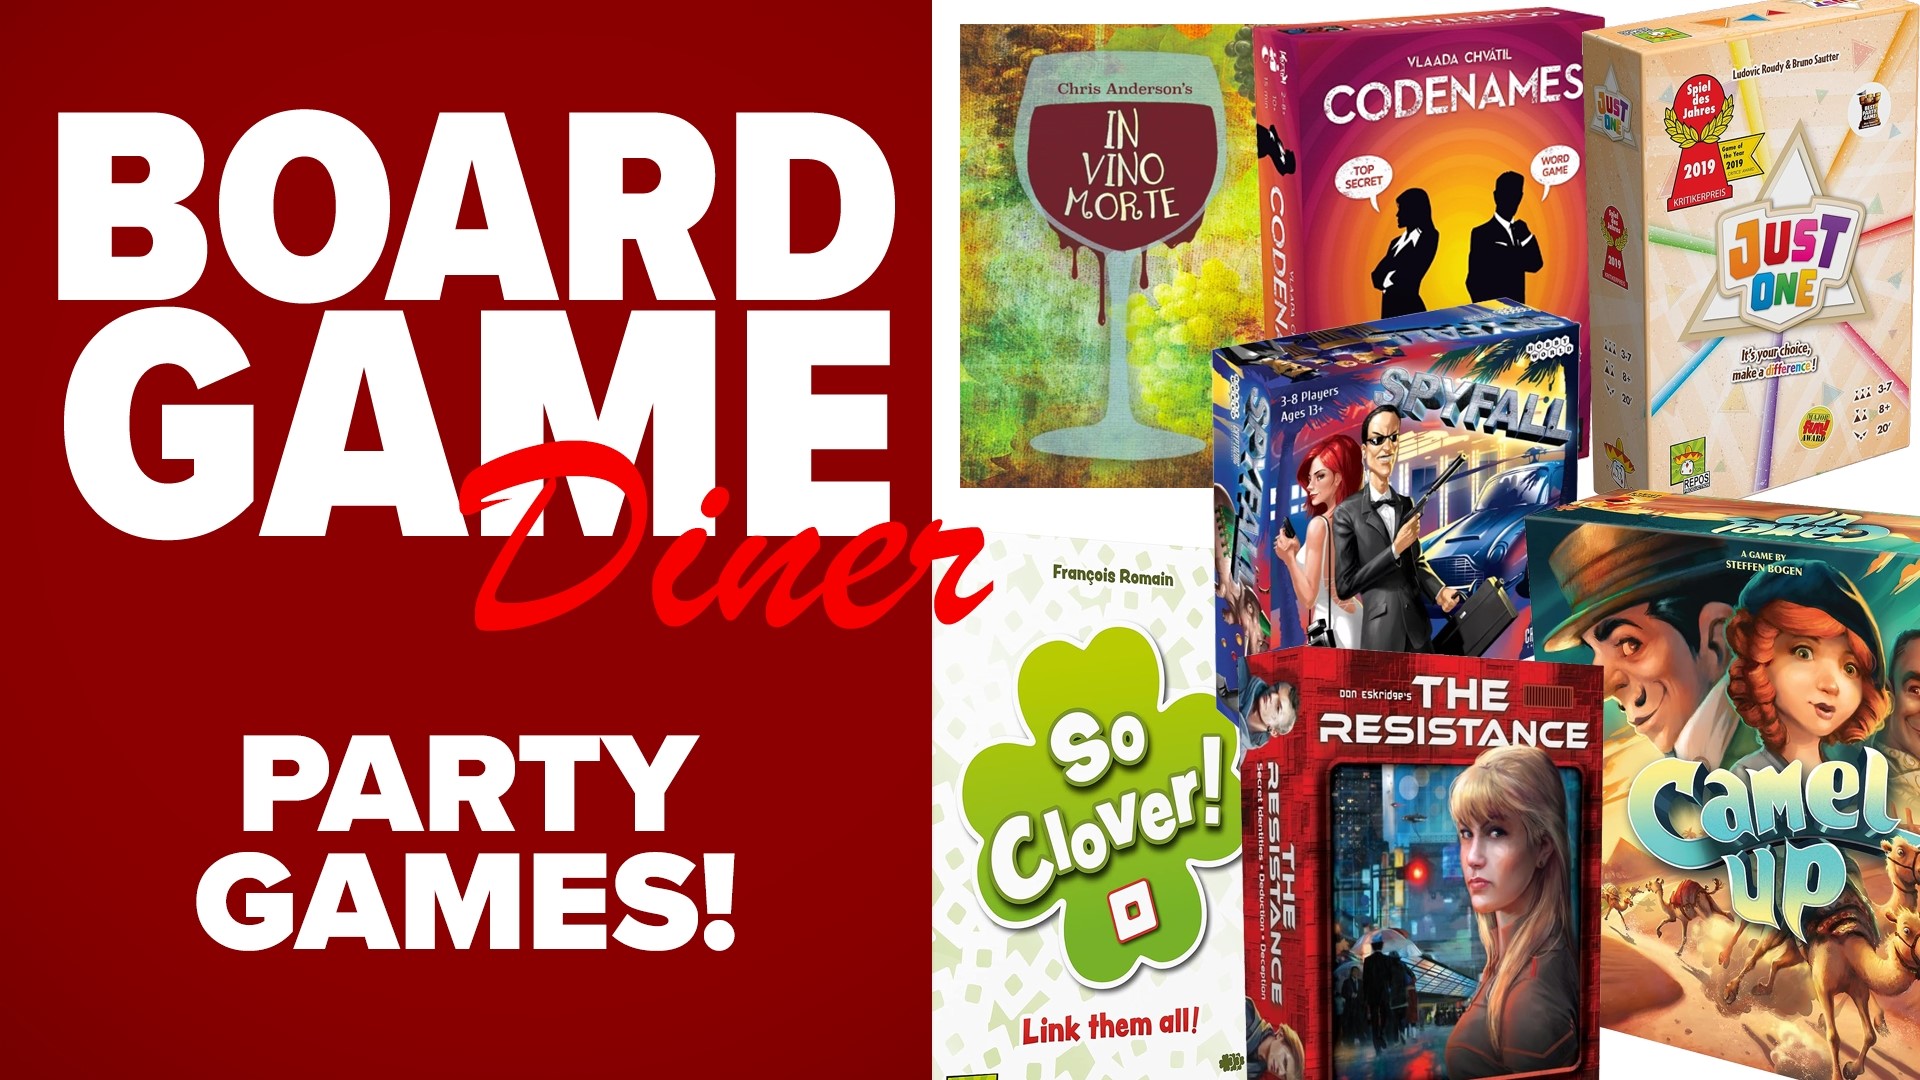 Take a look at some fun party games to bust out the next time friends are over! From tricky word games, to deception and yelling, these games bring all kinds of fun.